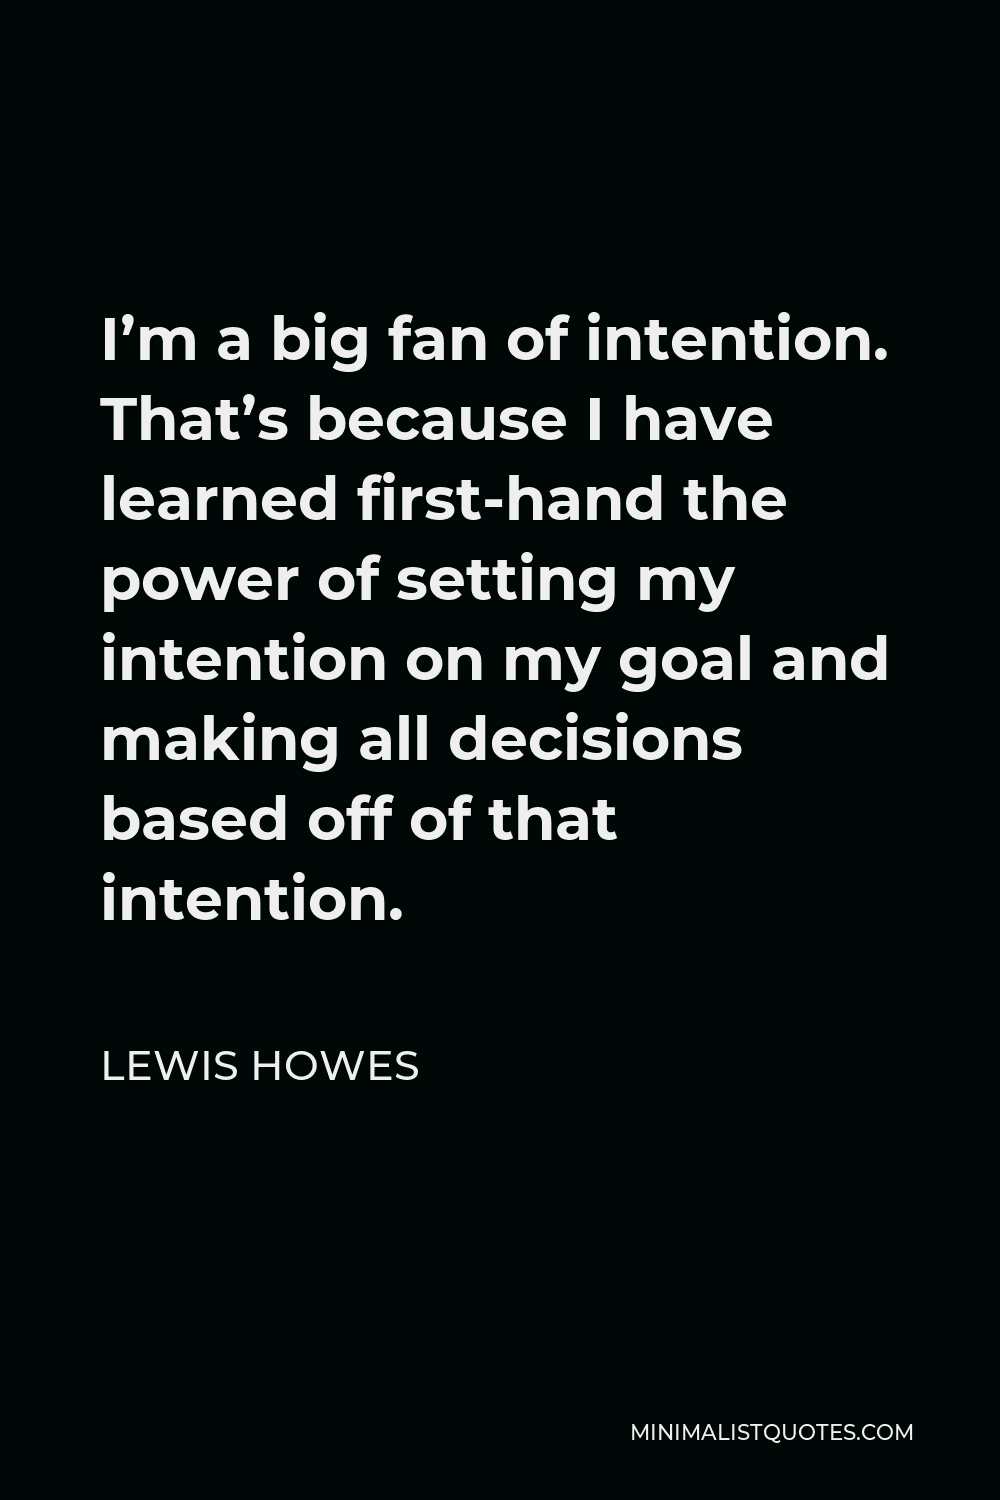 Lewis Howes Quote - I’m a big fan of intention. That’s because I have learned first-hand the power of setting my intention on my goal and making all decisions based off of that intention.